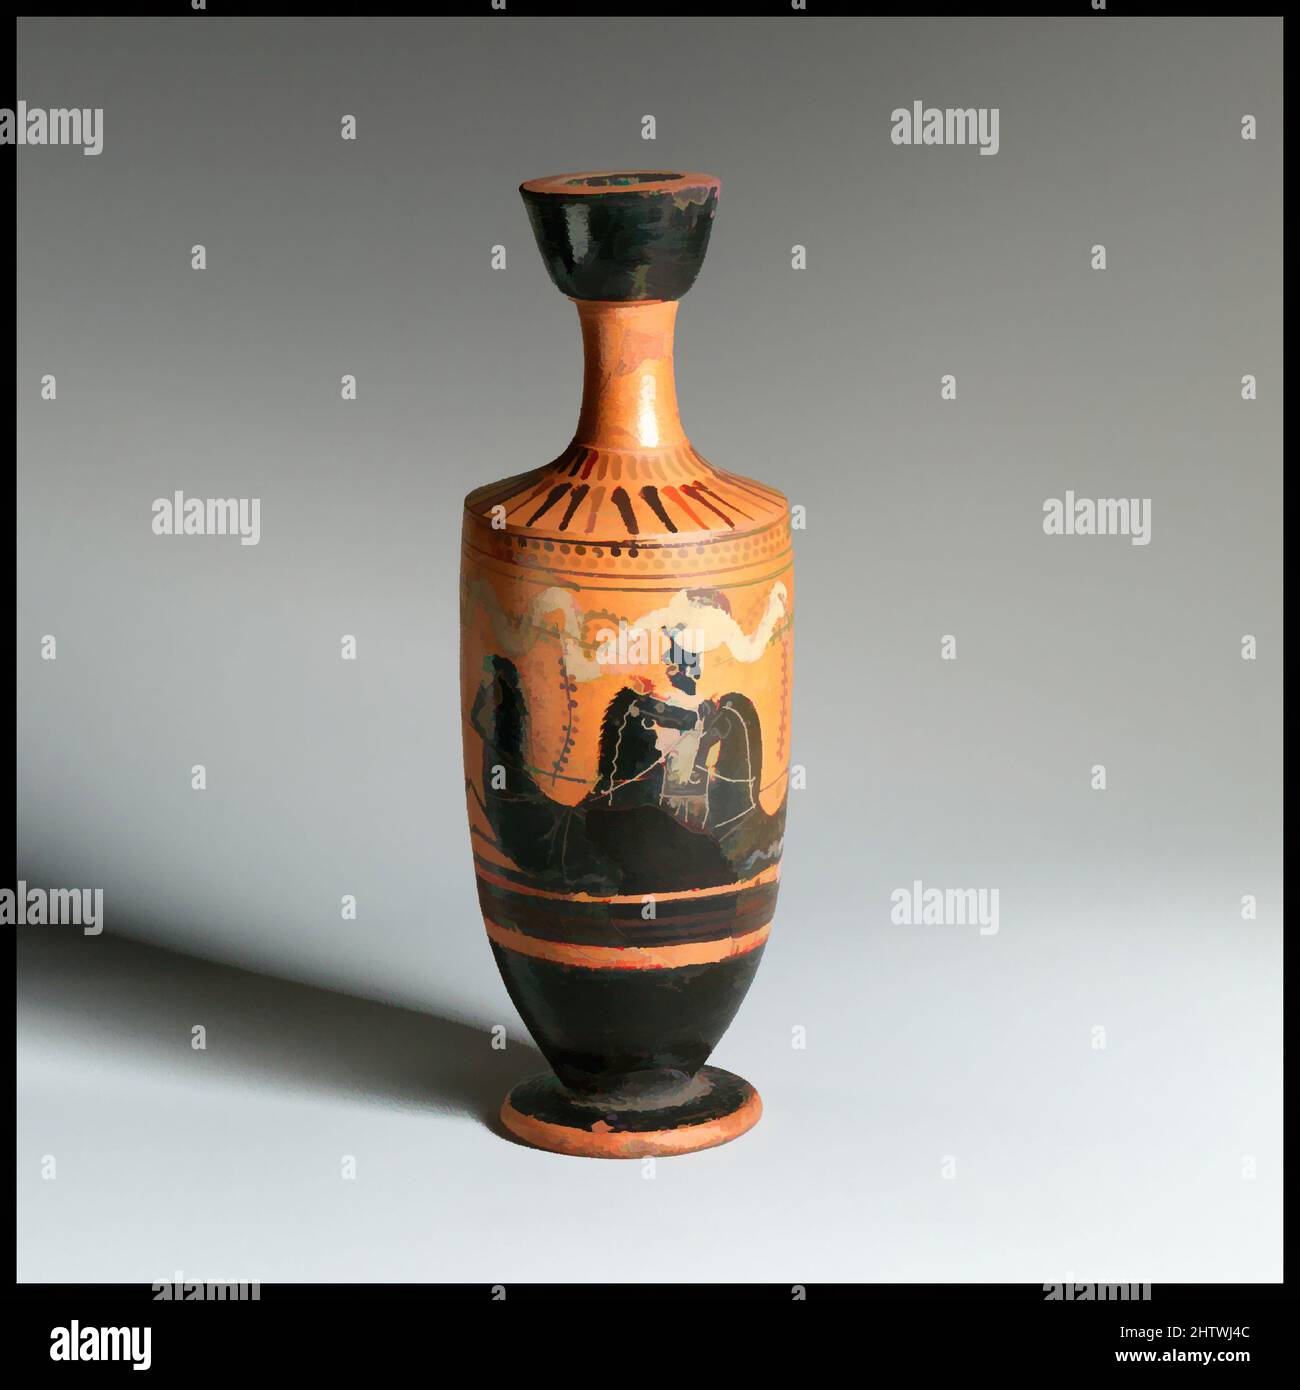 Art inspired by Lekythos, Late Archaic, 1st quarter of 5th century B.C., Greek, Attic, Terracotta; black-figure, Diameter: 2 11/16 × 1 5/8 × 2 1/8 in. (6.8 × 4.1 × 5.3 cm), Vases, Classic works modernized by Artotop with a splash of modernity. Shapes, color and value, eye-catching visual impact on art. Emotions through freedom of artworks in a contemporary way. A timeless message pursuing a wildly creative new direction. Artists turning to the digital medium and creating the Artotop NFT Stock Photo